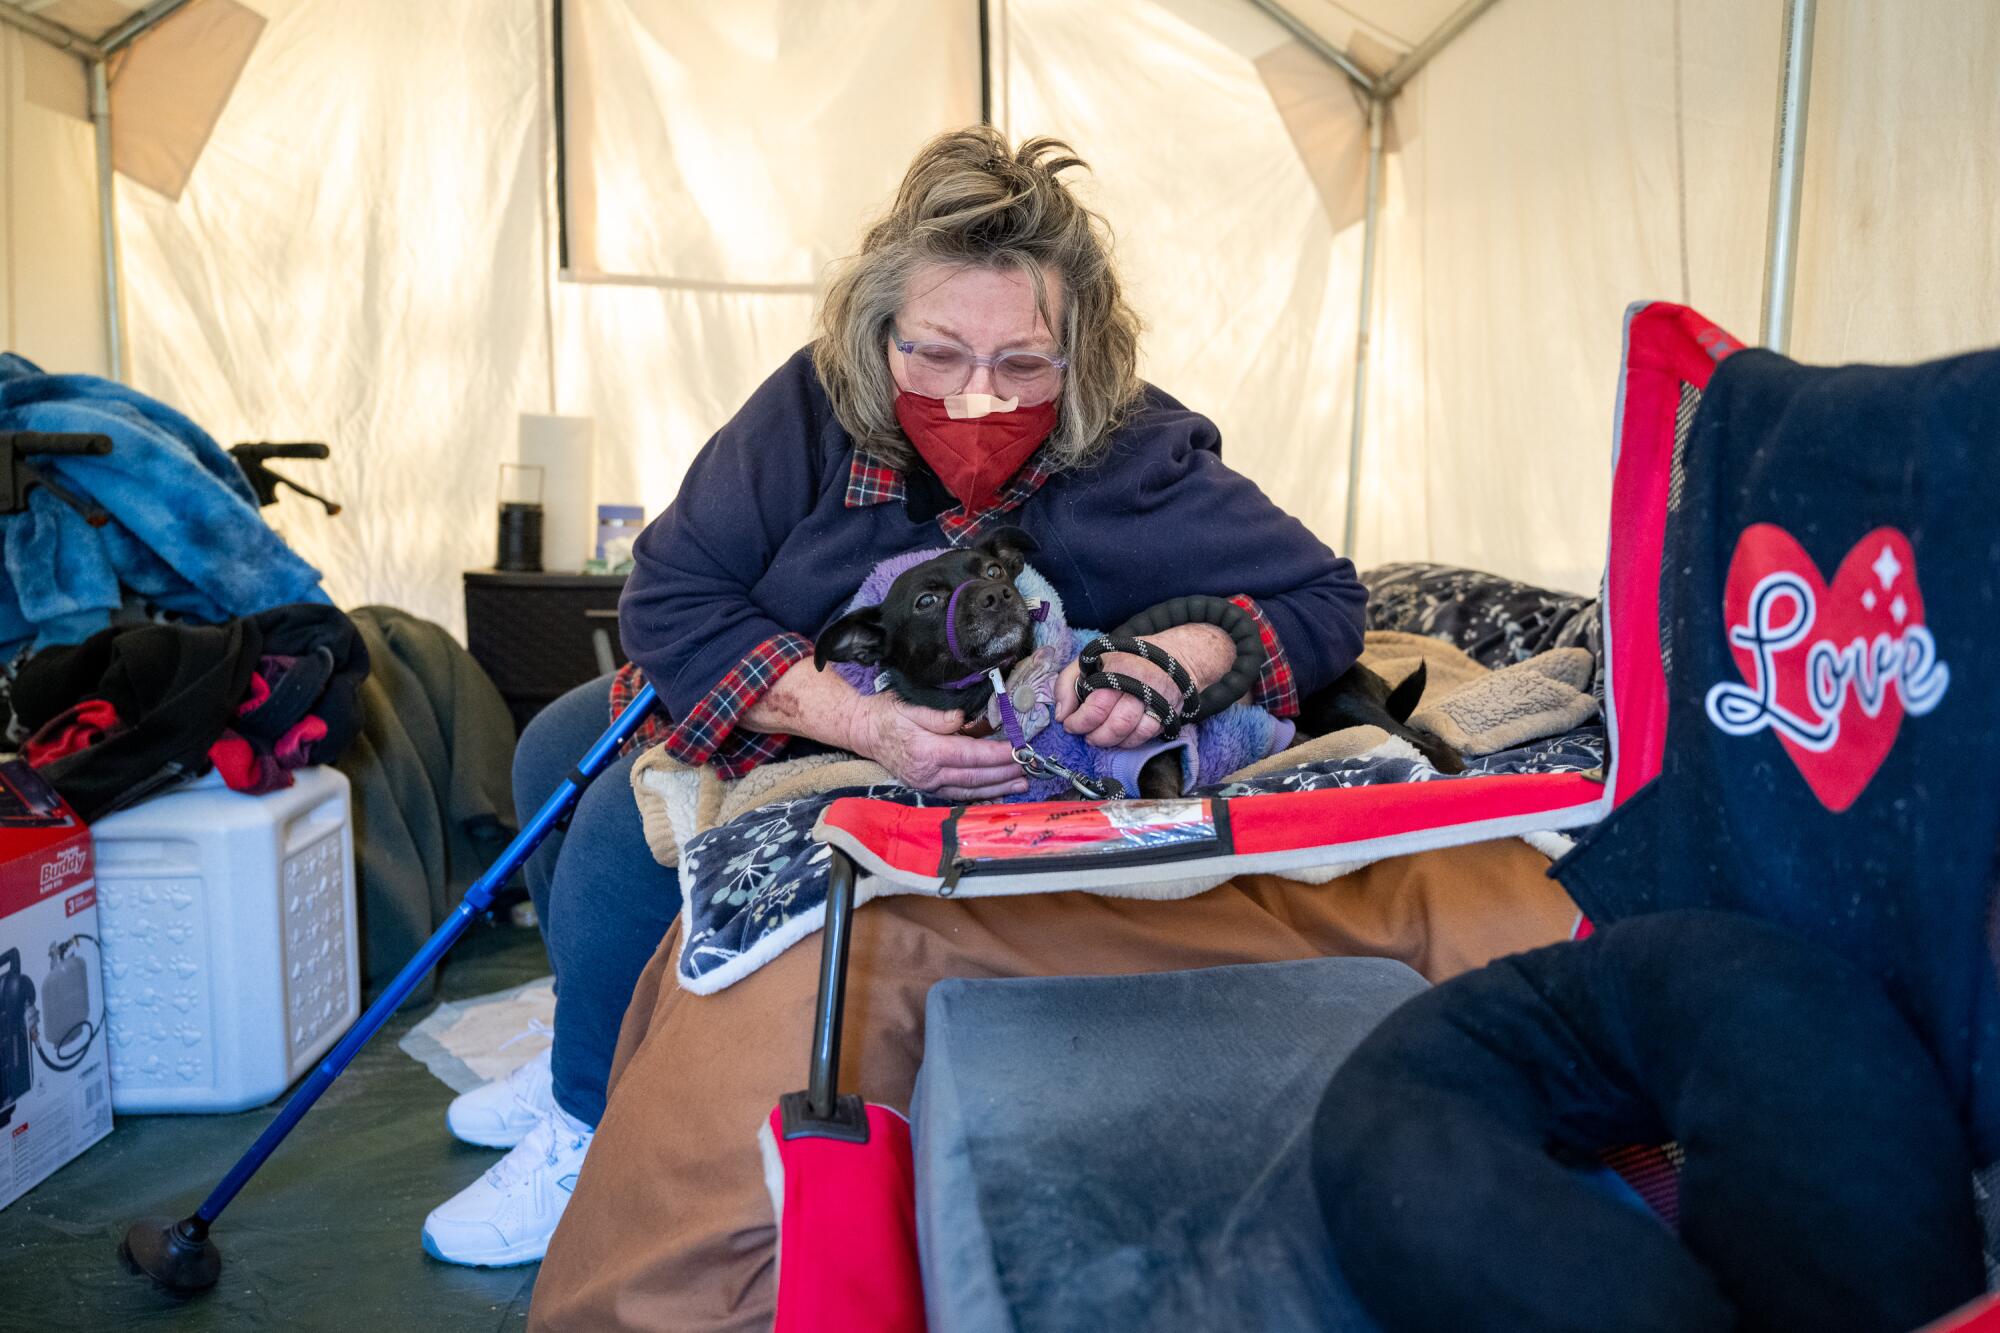 A woman plays with her dog in a tent at a homeless encampment.